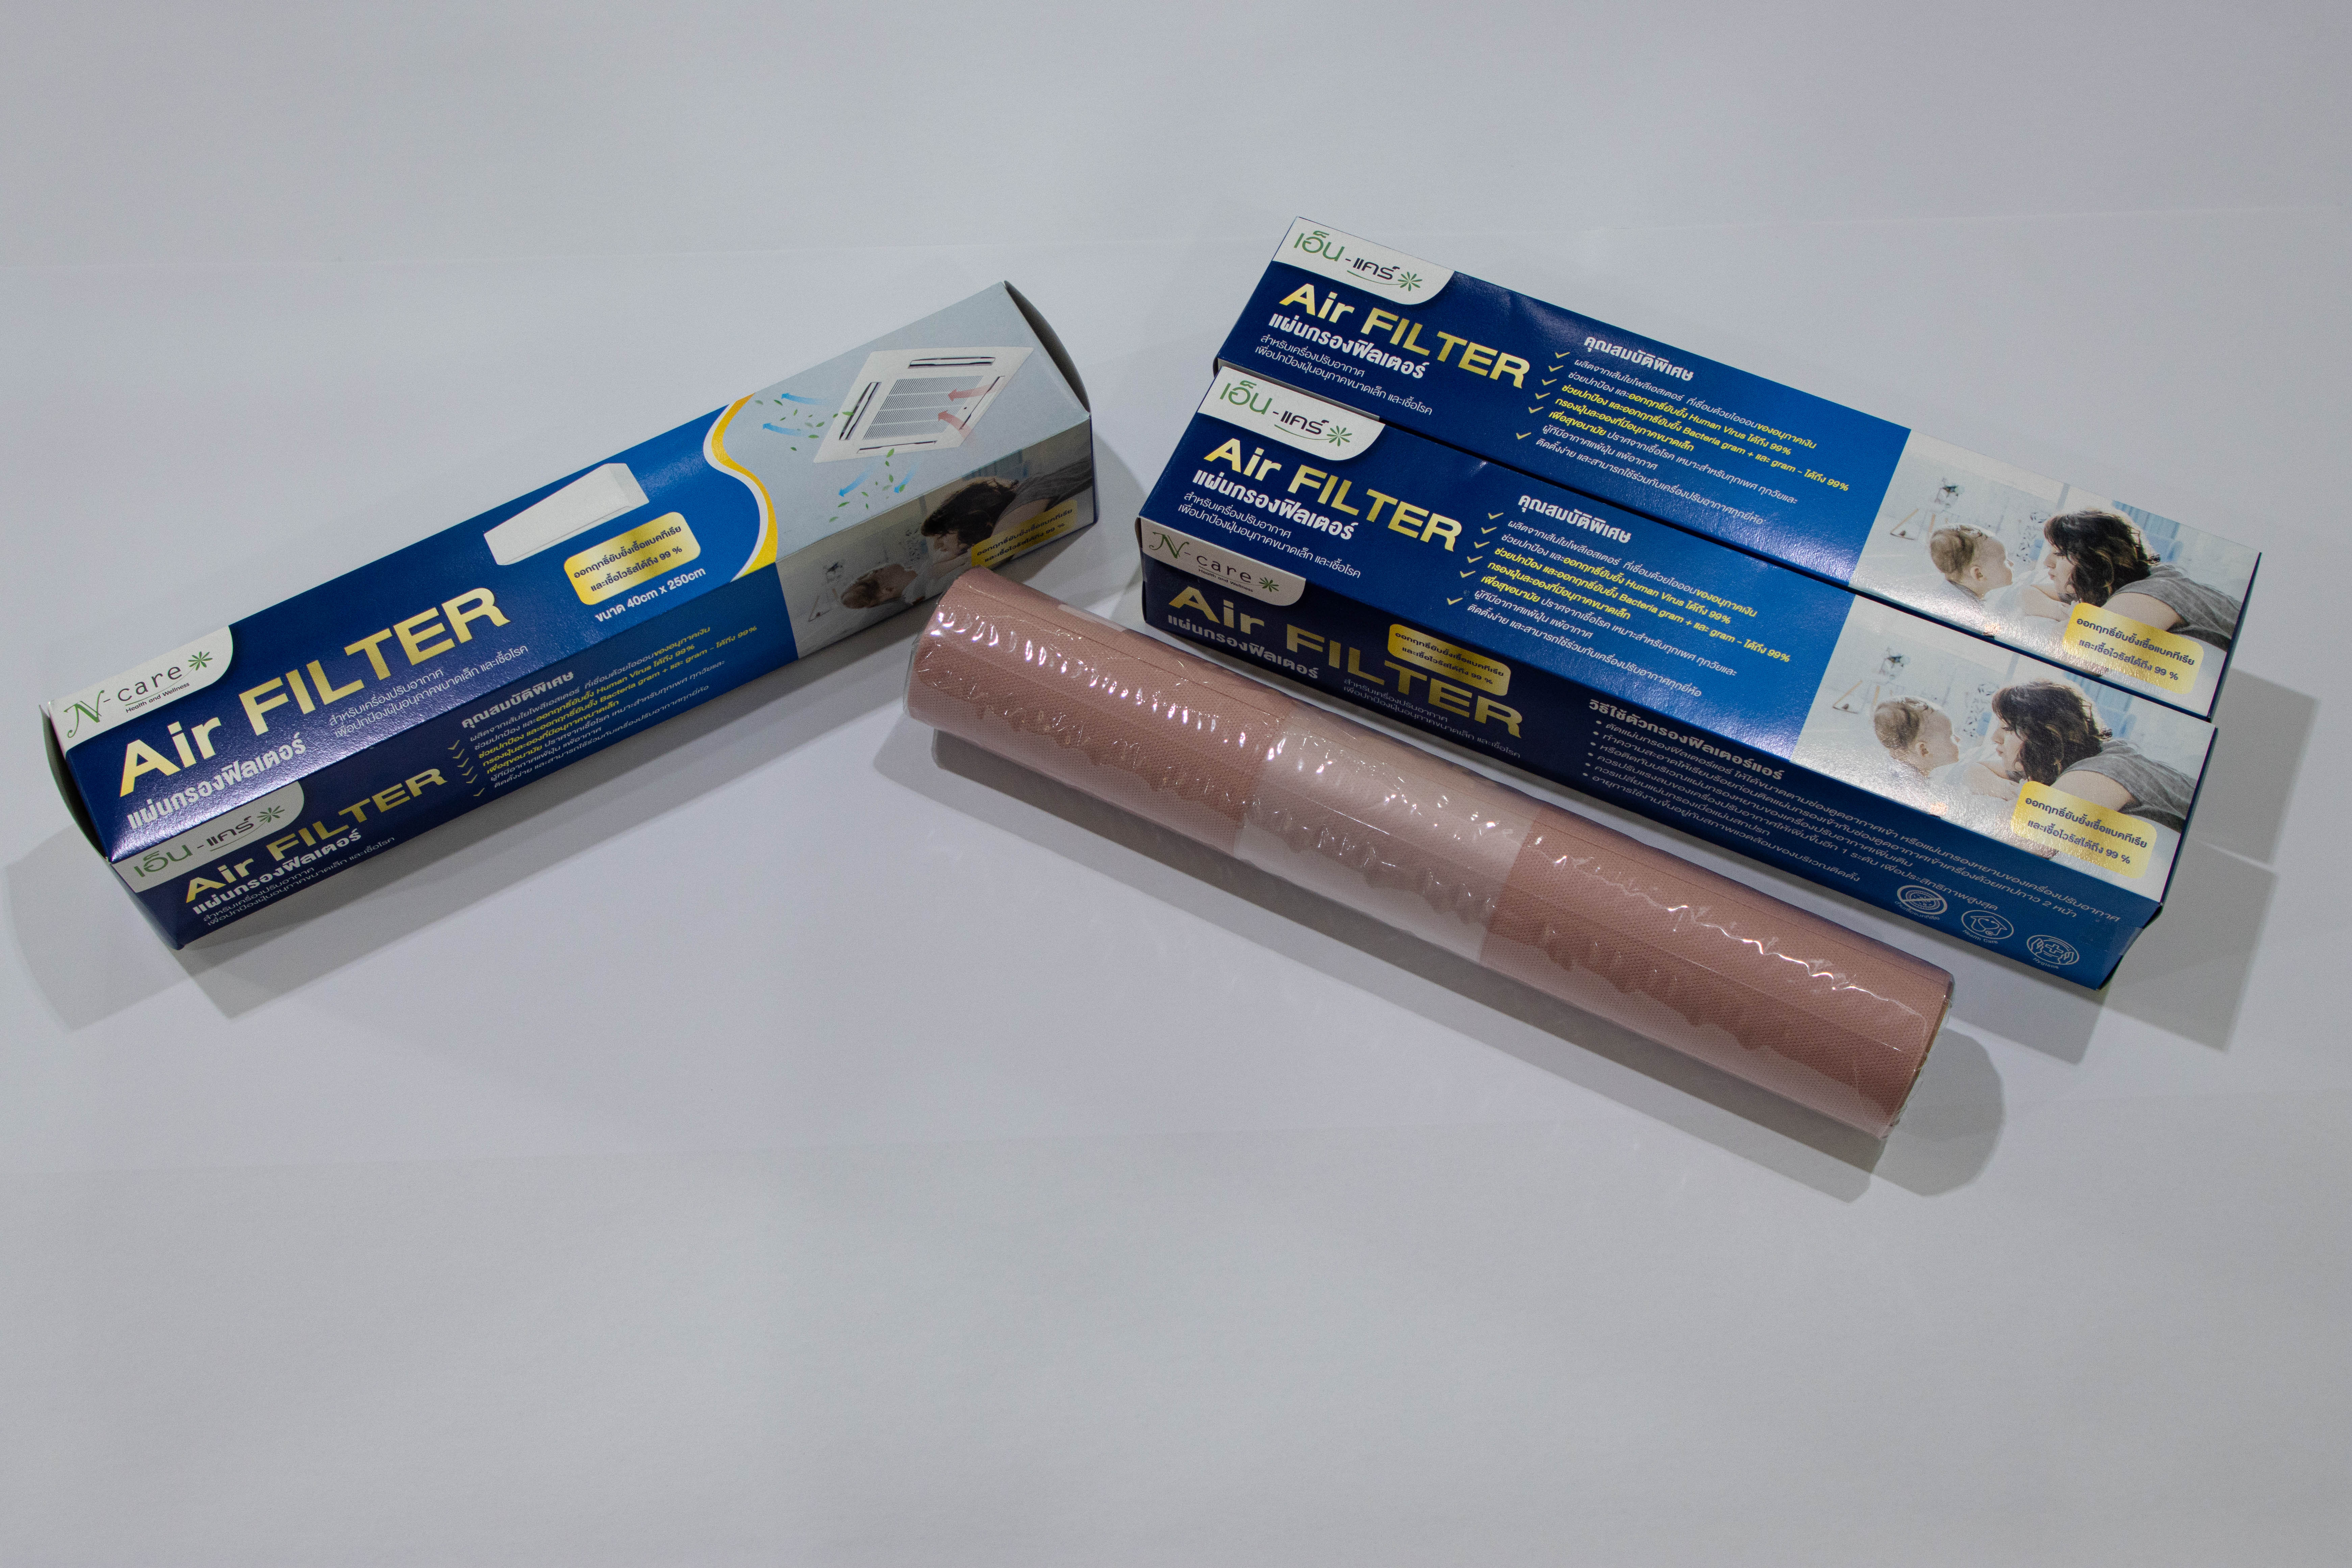 N-Care Air Filter with Copper Ion